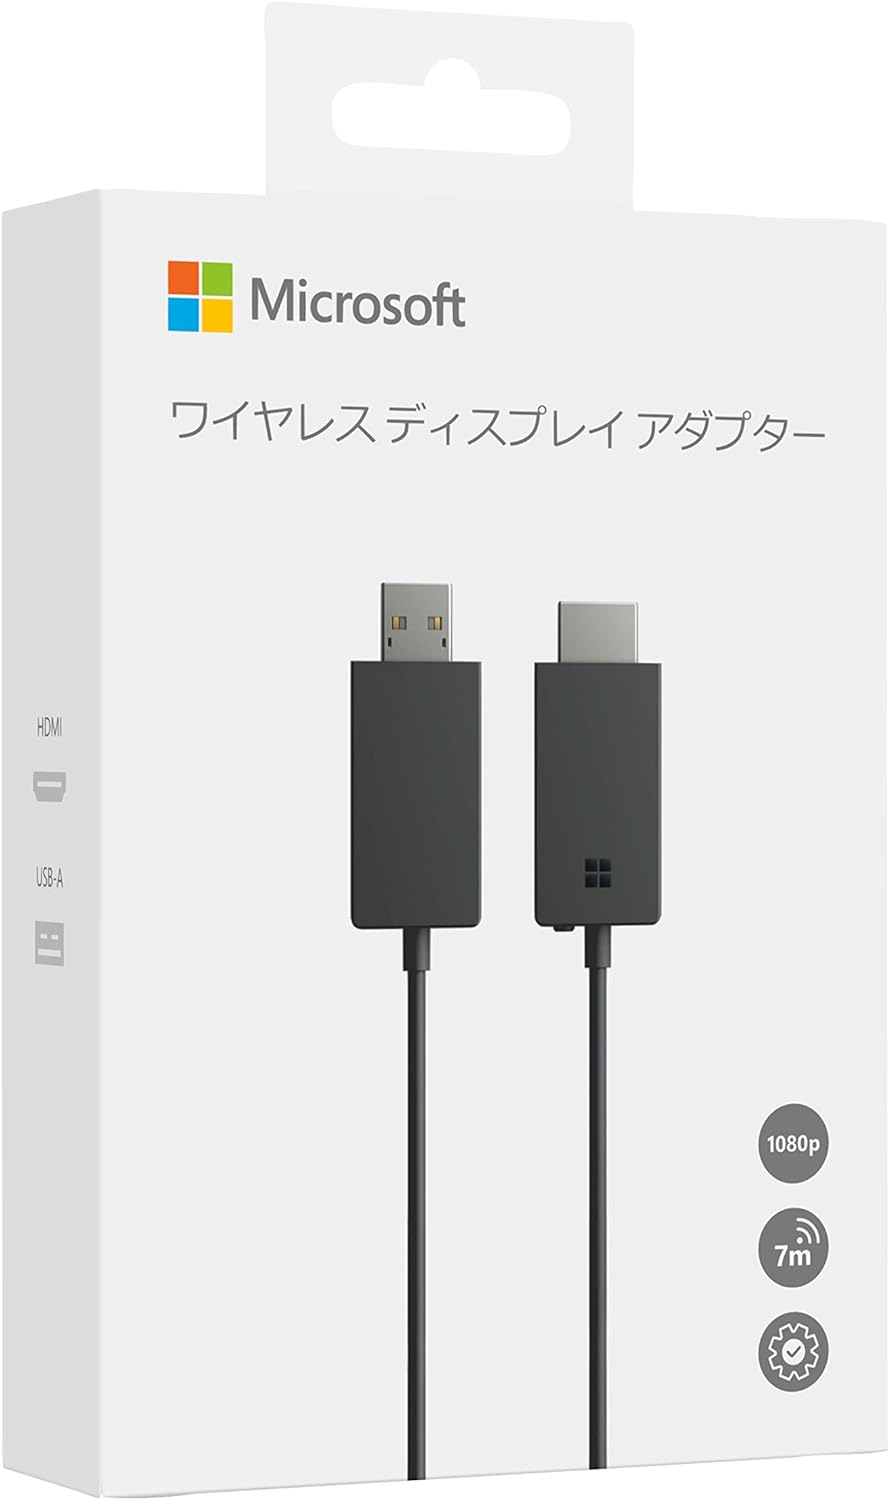 ޥե 磻쥹 ǥץ쥤 ץ P3Q-00009 : Wi-Fi Miracast ѥ䥹ޥۤβ̤ߥ顼 USBŲ ñ³ ( ֥å ) Windows Surface б